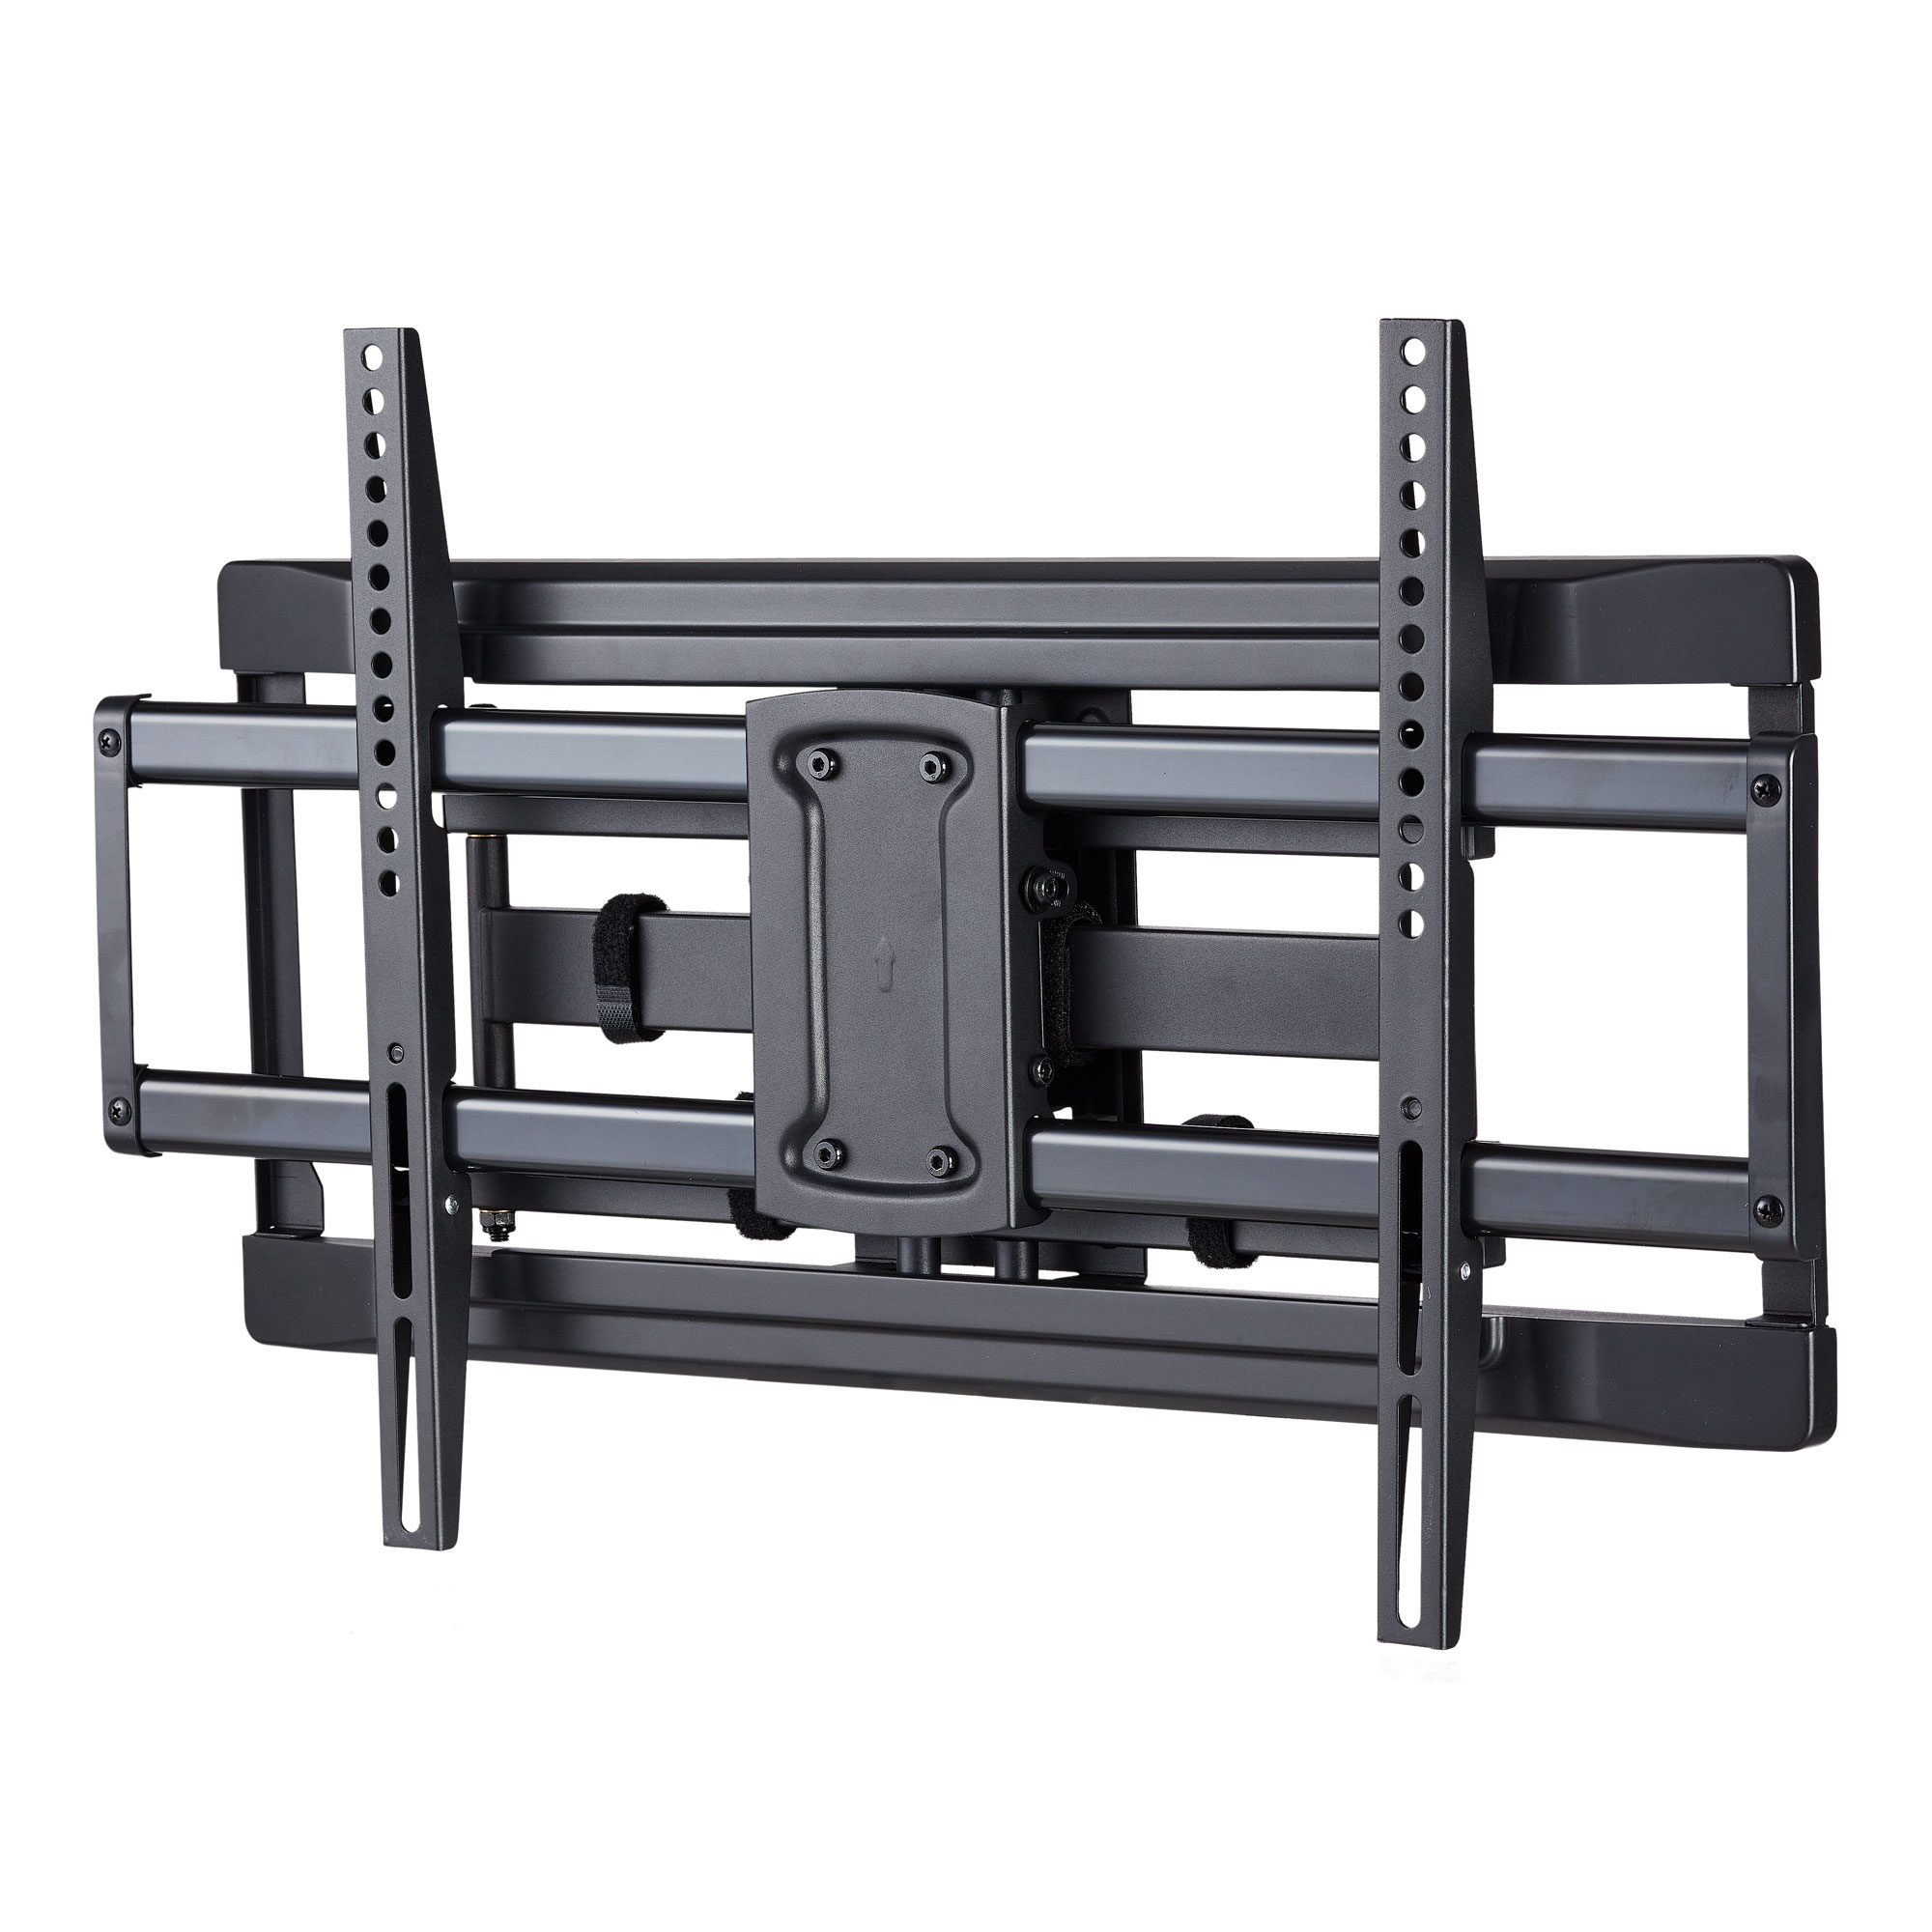 Starts Nov 22: onn. Full Motion TV Wall Mount for 50" to 86" TV's, up to 45° Swivel and 15° Tilting